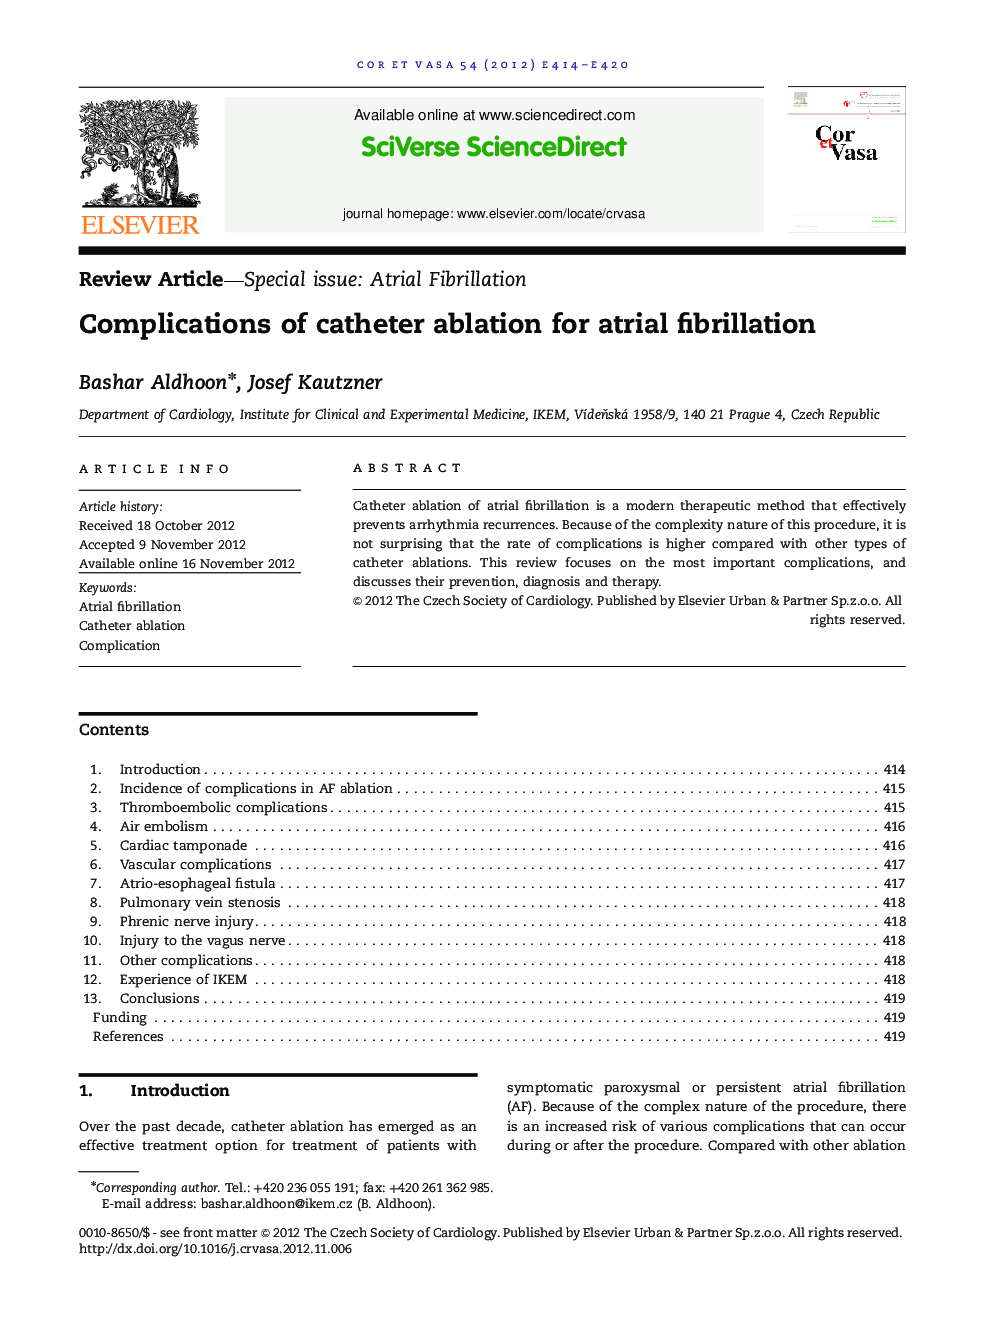 Complications of catheter ablation for atrial fibrillation